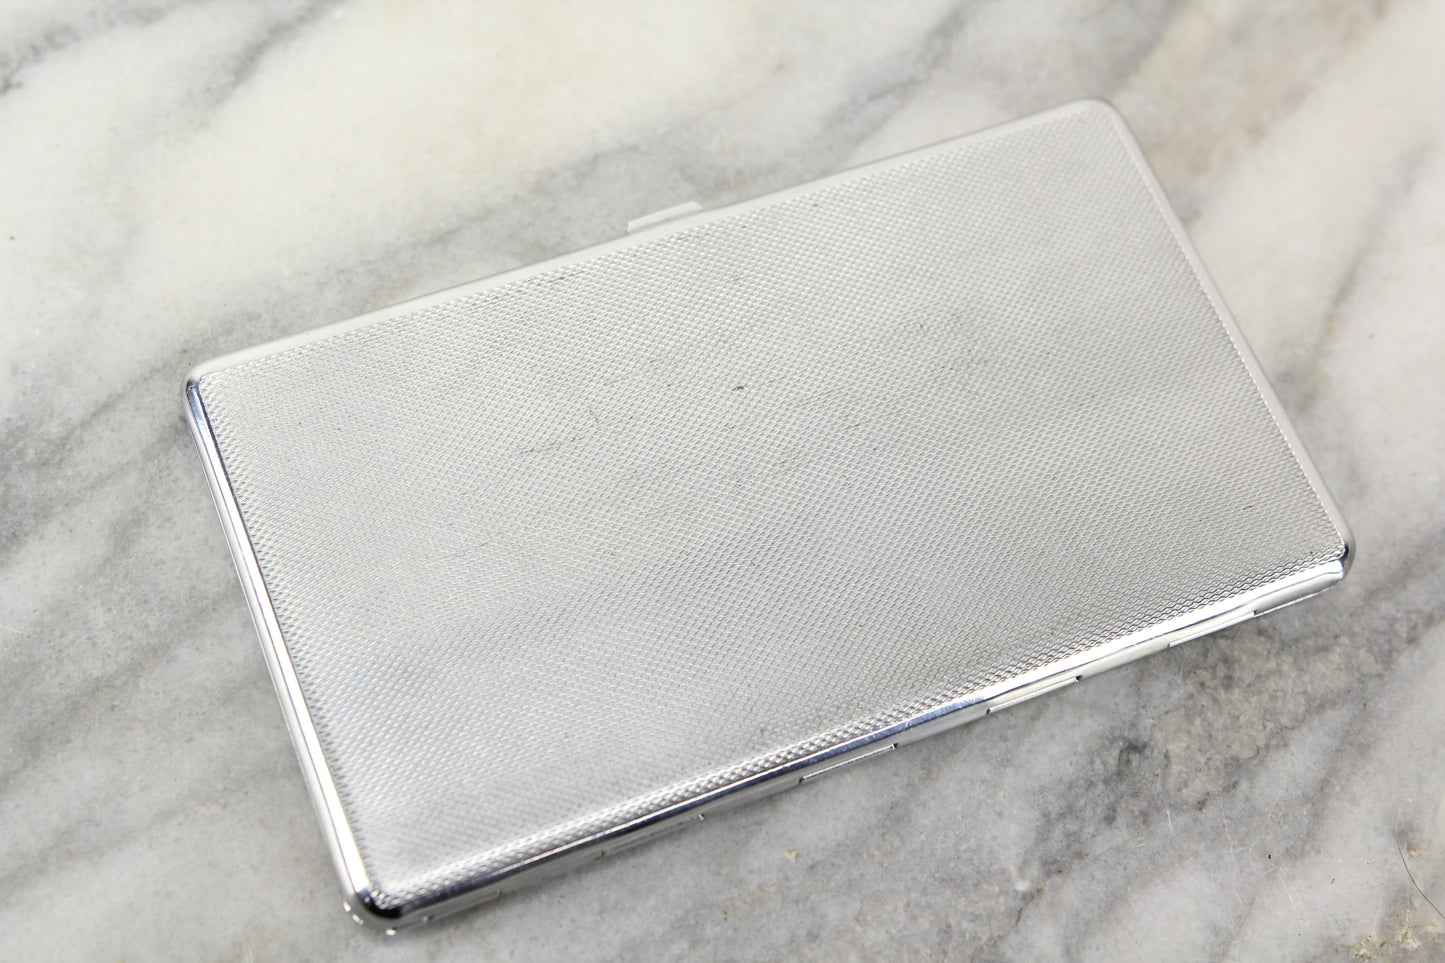 Gibraltar Polished Chrome Cigarette Case Holder by Mayell, Made in England